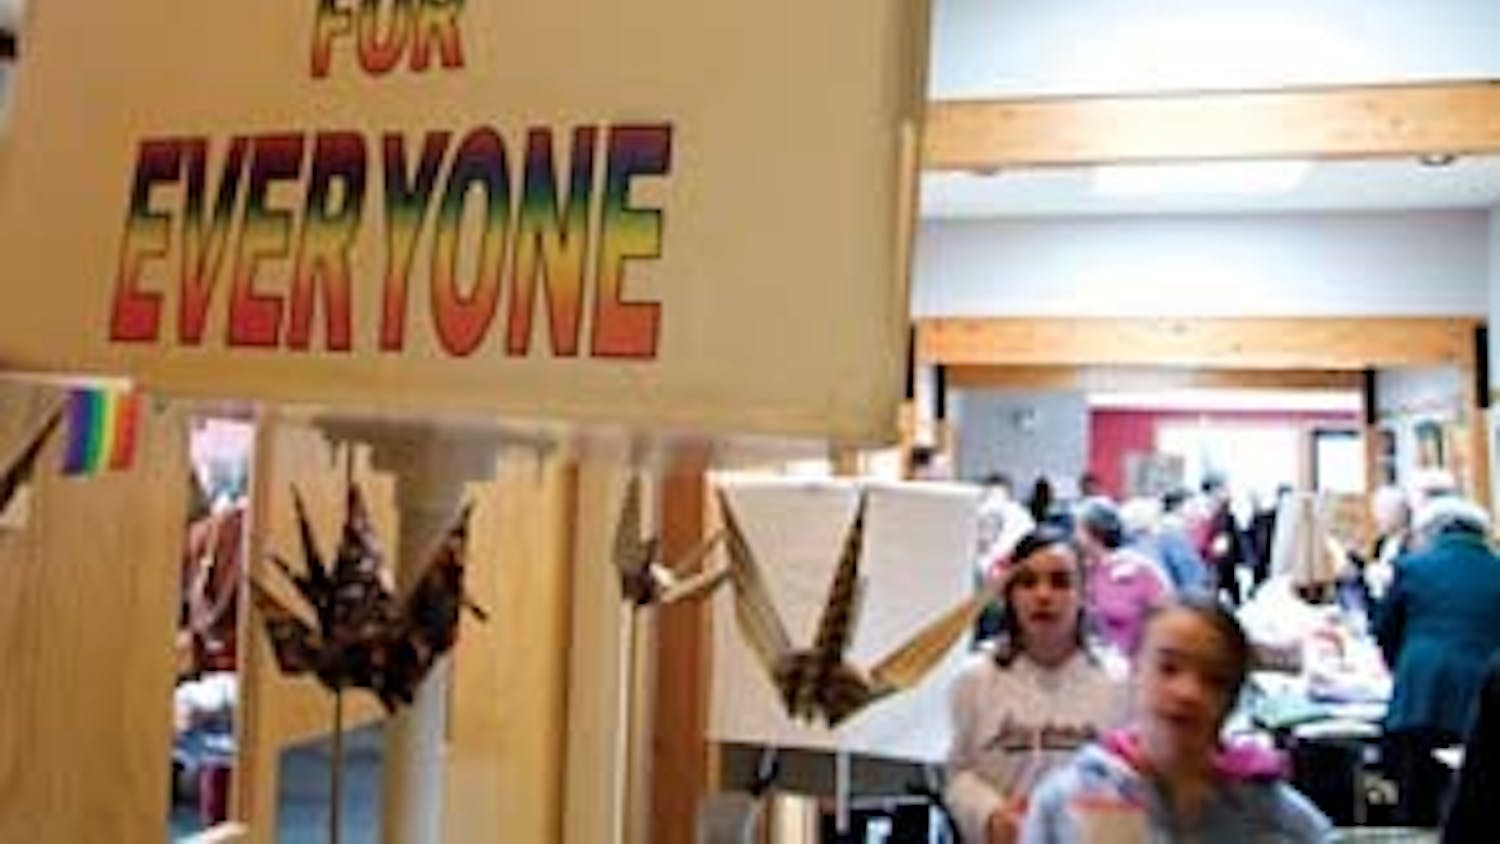 Two girls shuffle past a sign that reads "Equal rights for everyone" before Sunday service at the Unitarian Universalist Church.  According to sophomore Drake Holston, "Unitarianism really encourages a plethora of beliefs among its members."